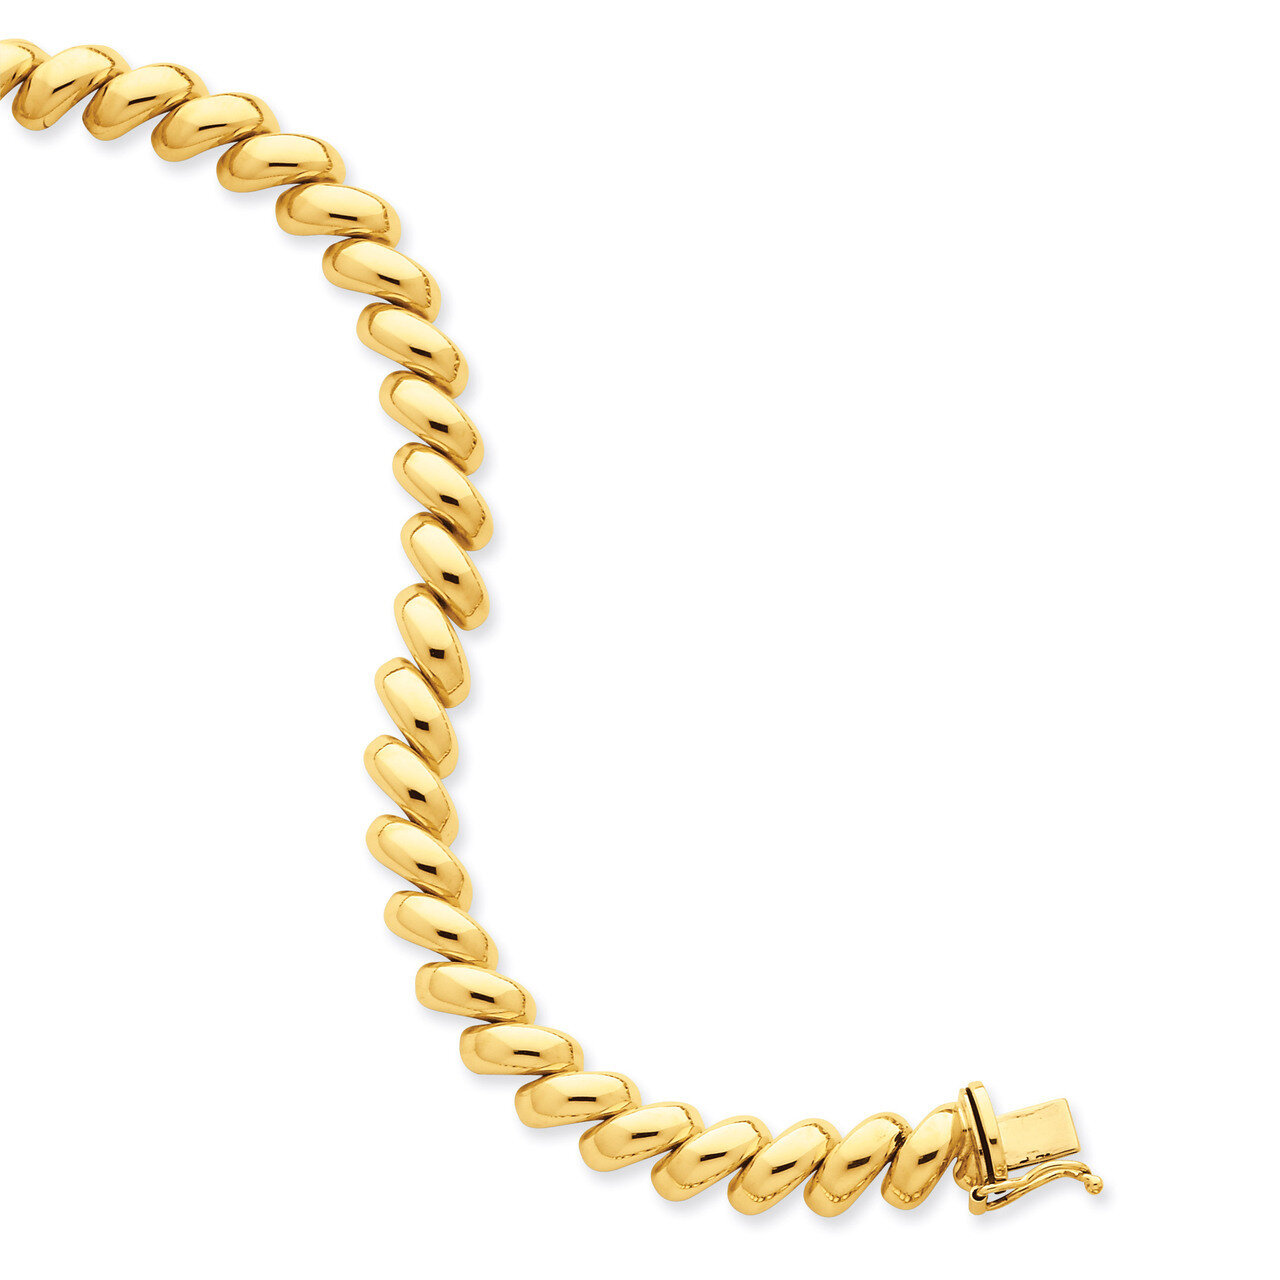 San Marco Necklace 17 Inch 14k Gold Polished SM14-17